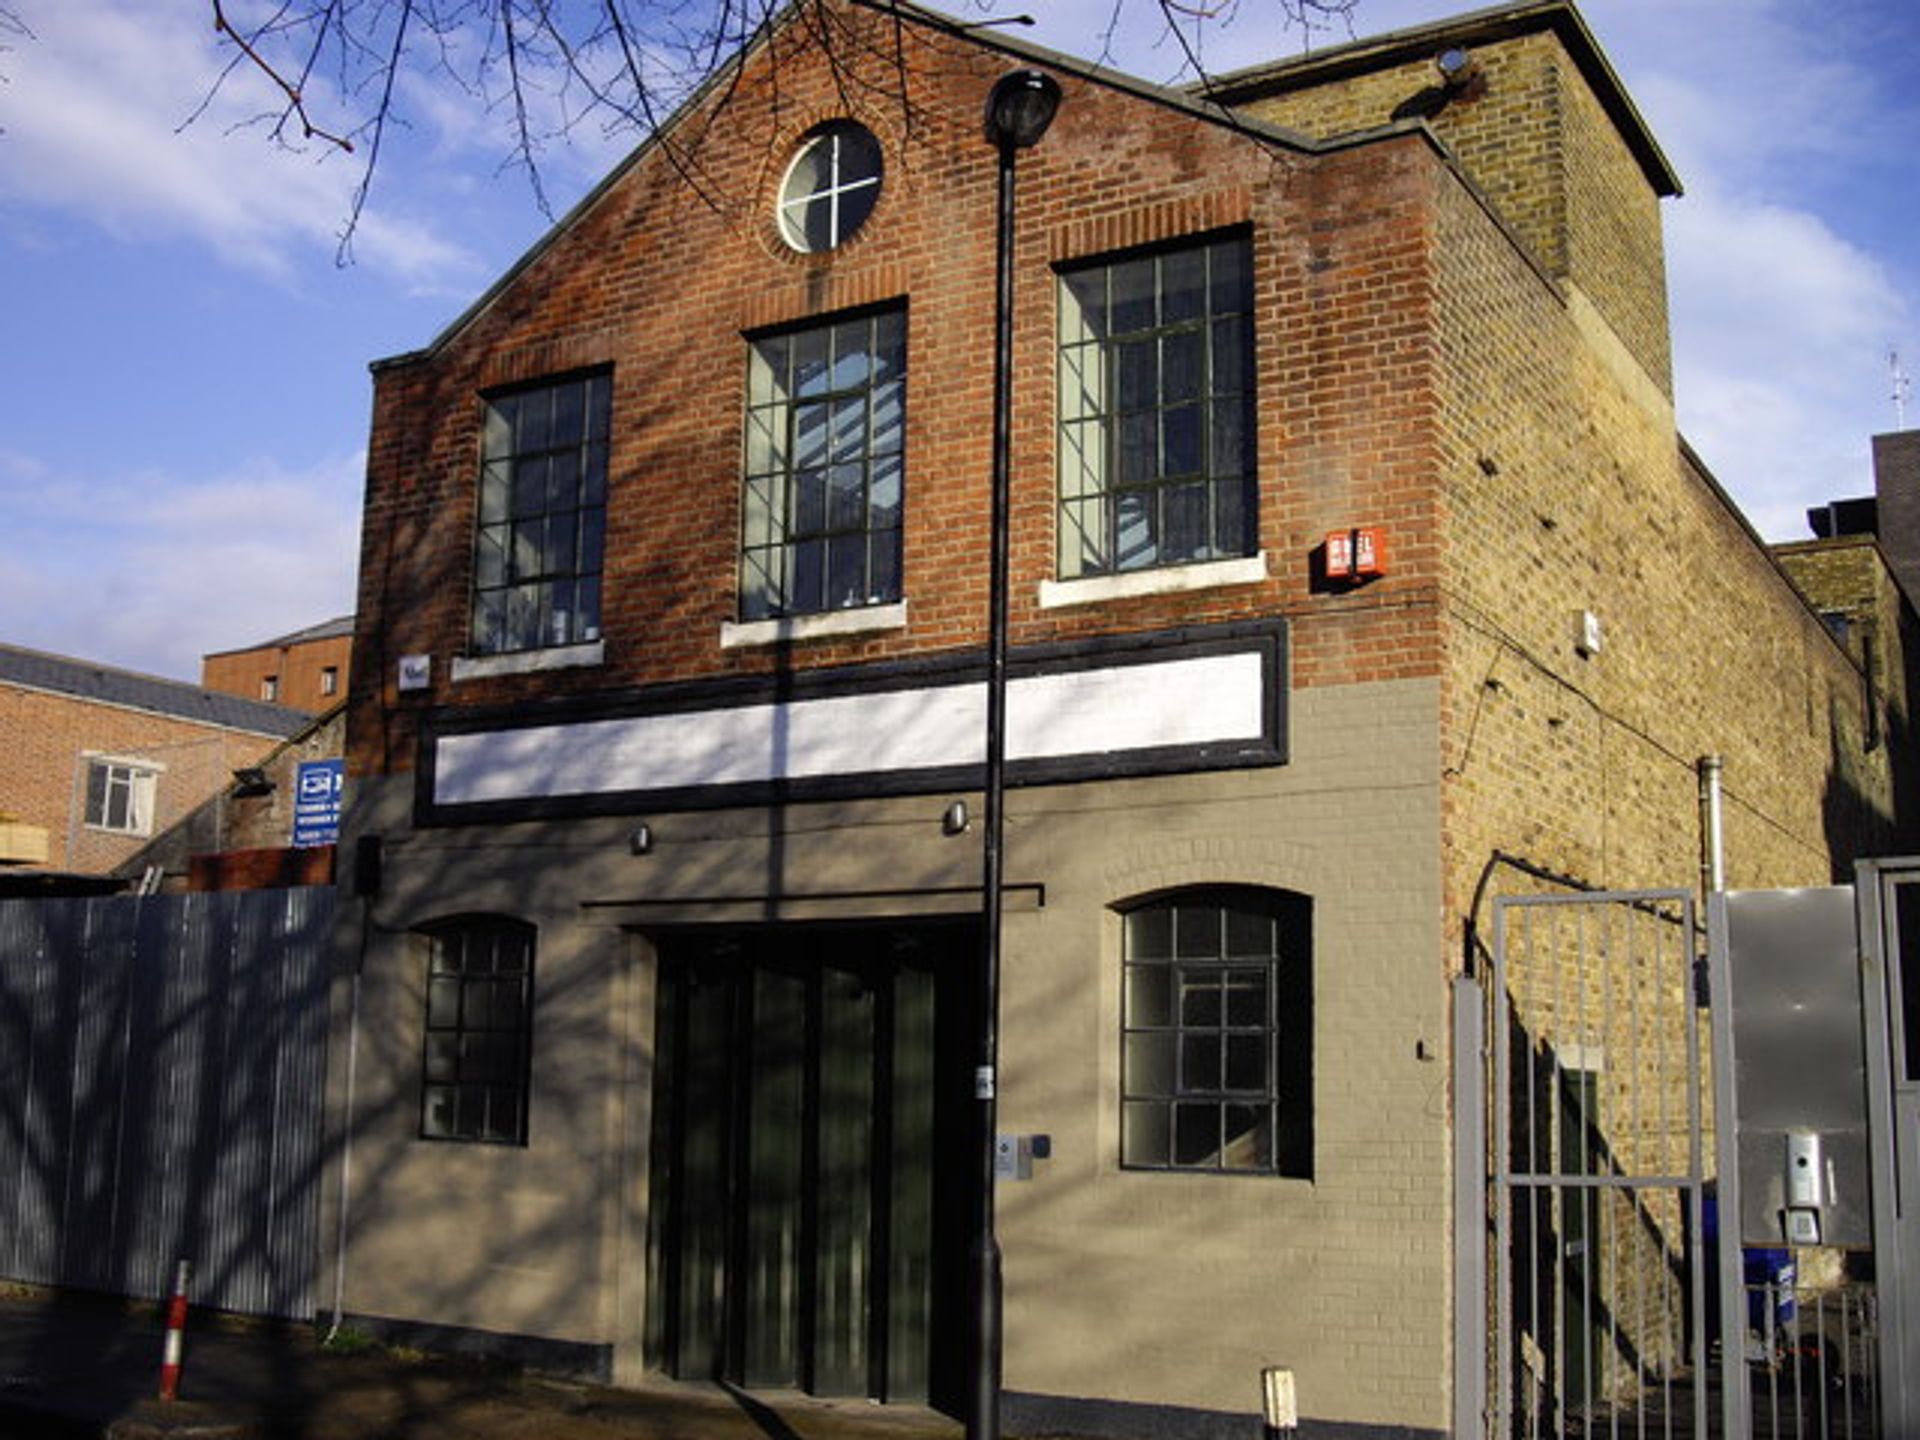 The art and activist organisation a/political is moving into a permanent space in Kennington, London.